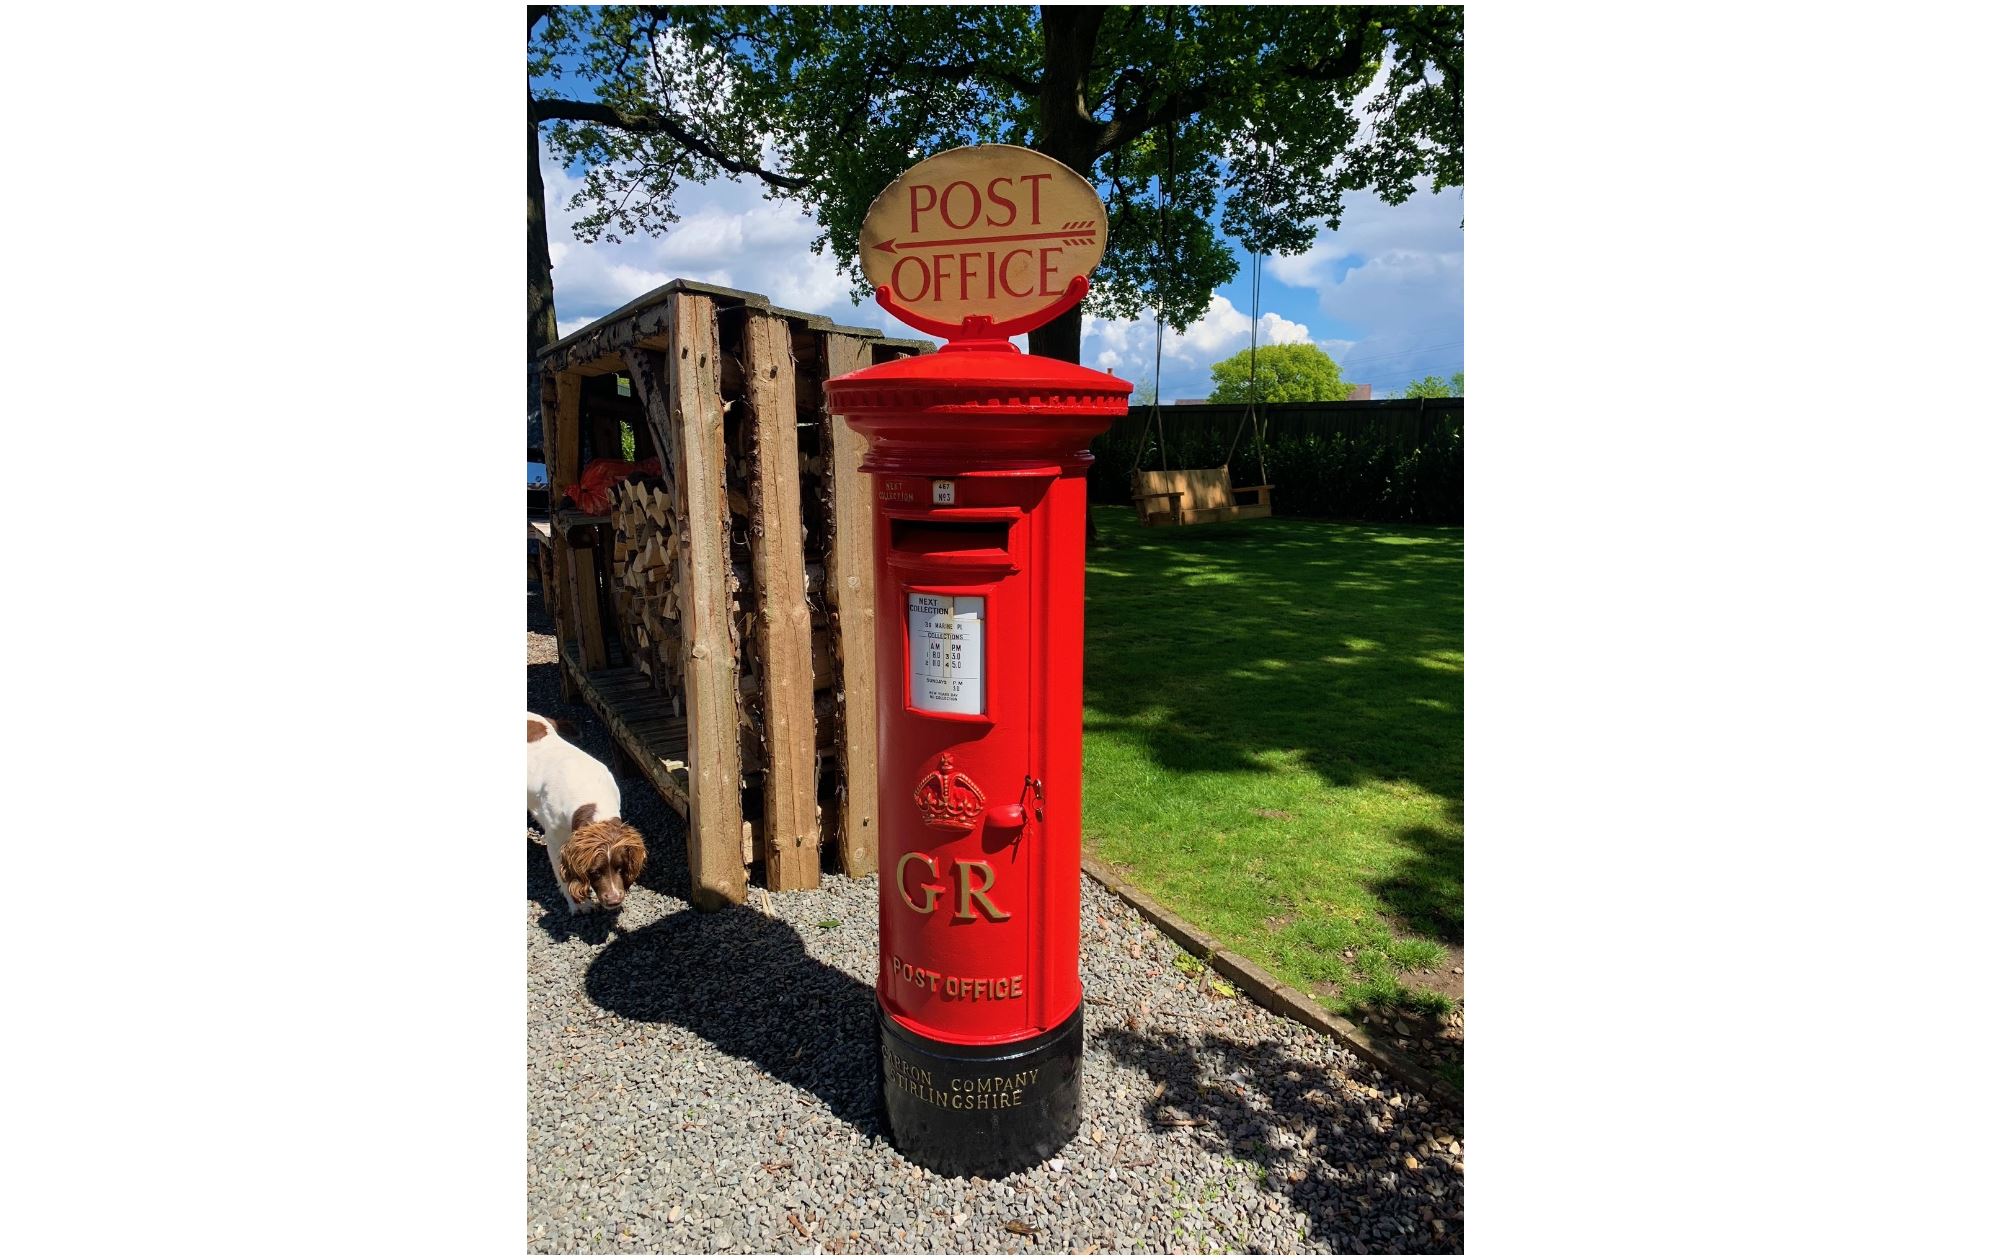 At UKAA we supply original Royal Mail post boxes and signs which have all been fully restored. Each box comes with their original Chubb lock and keys